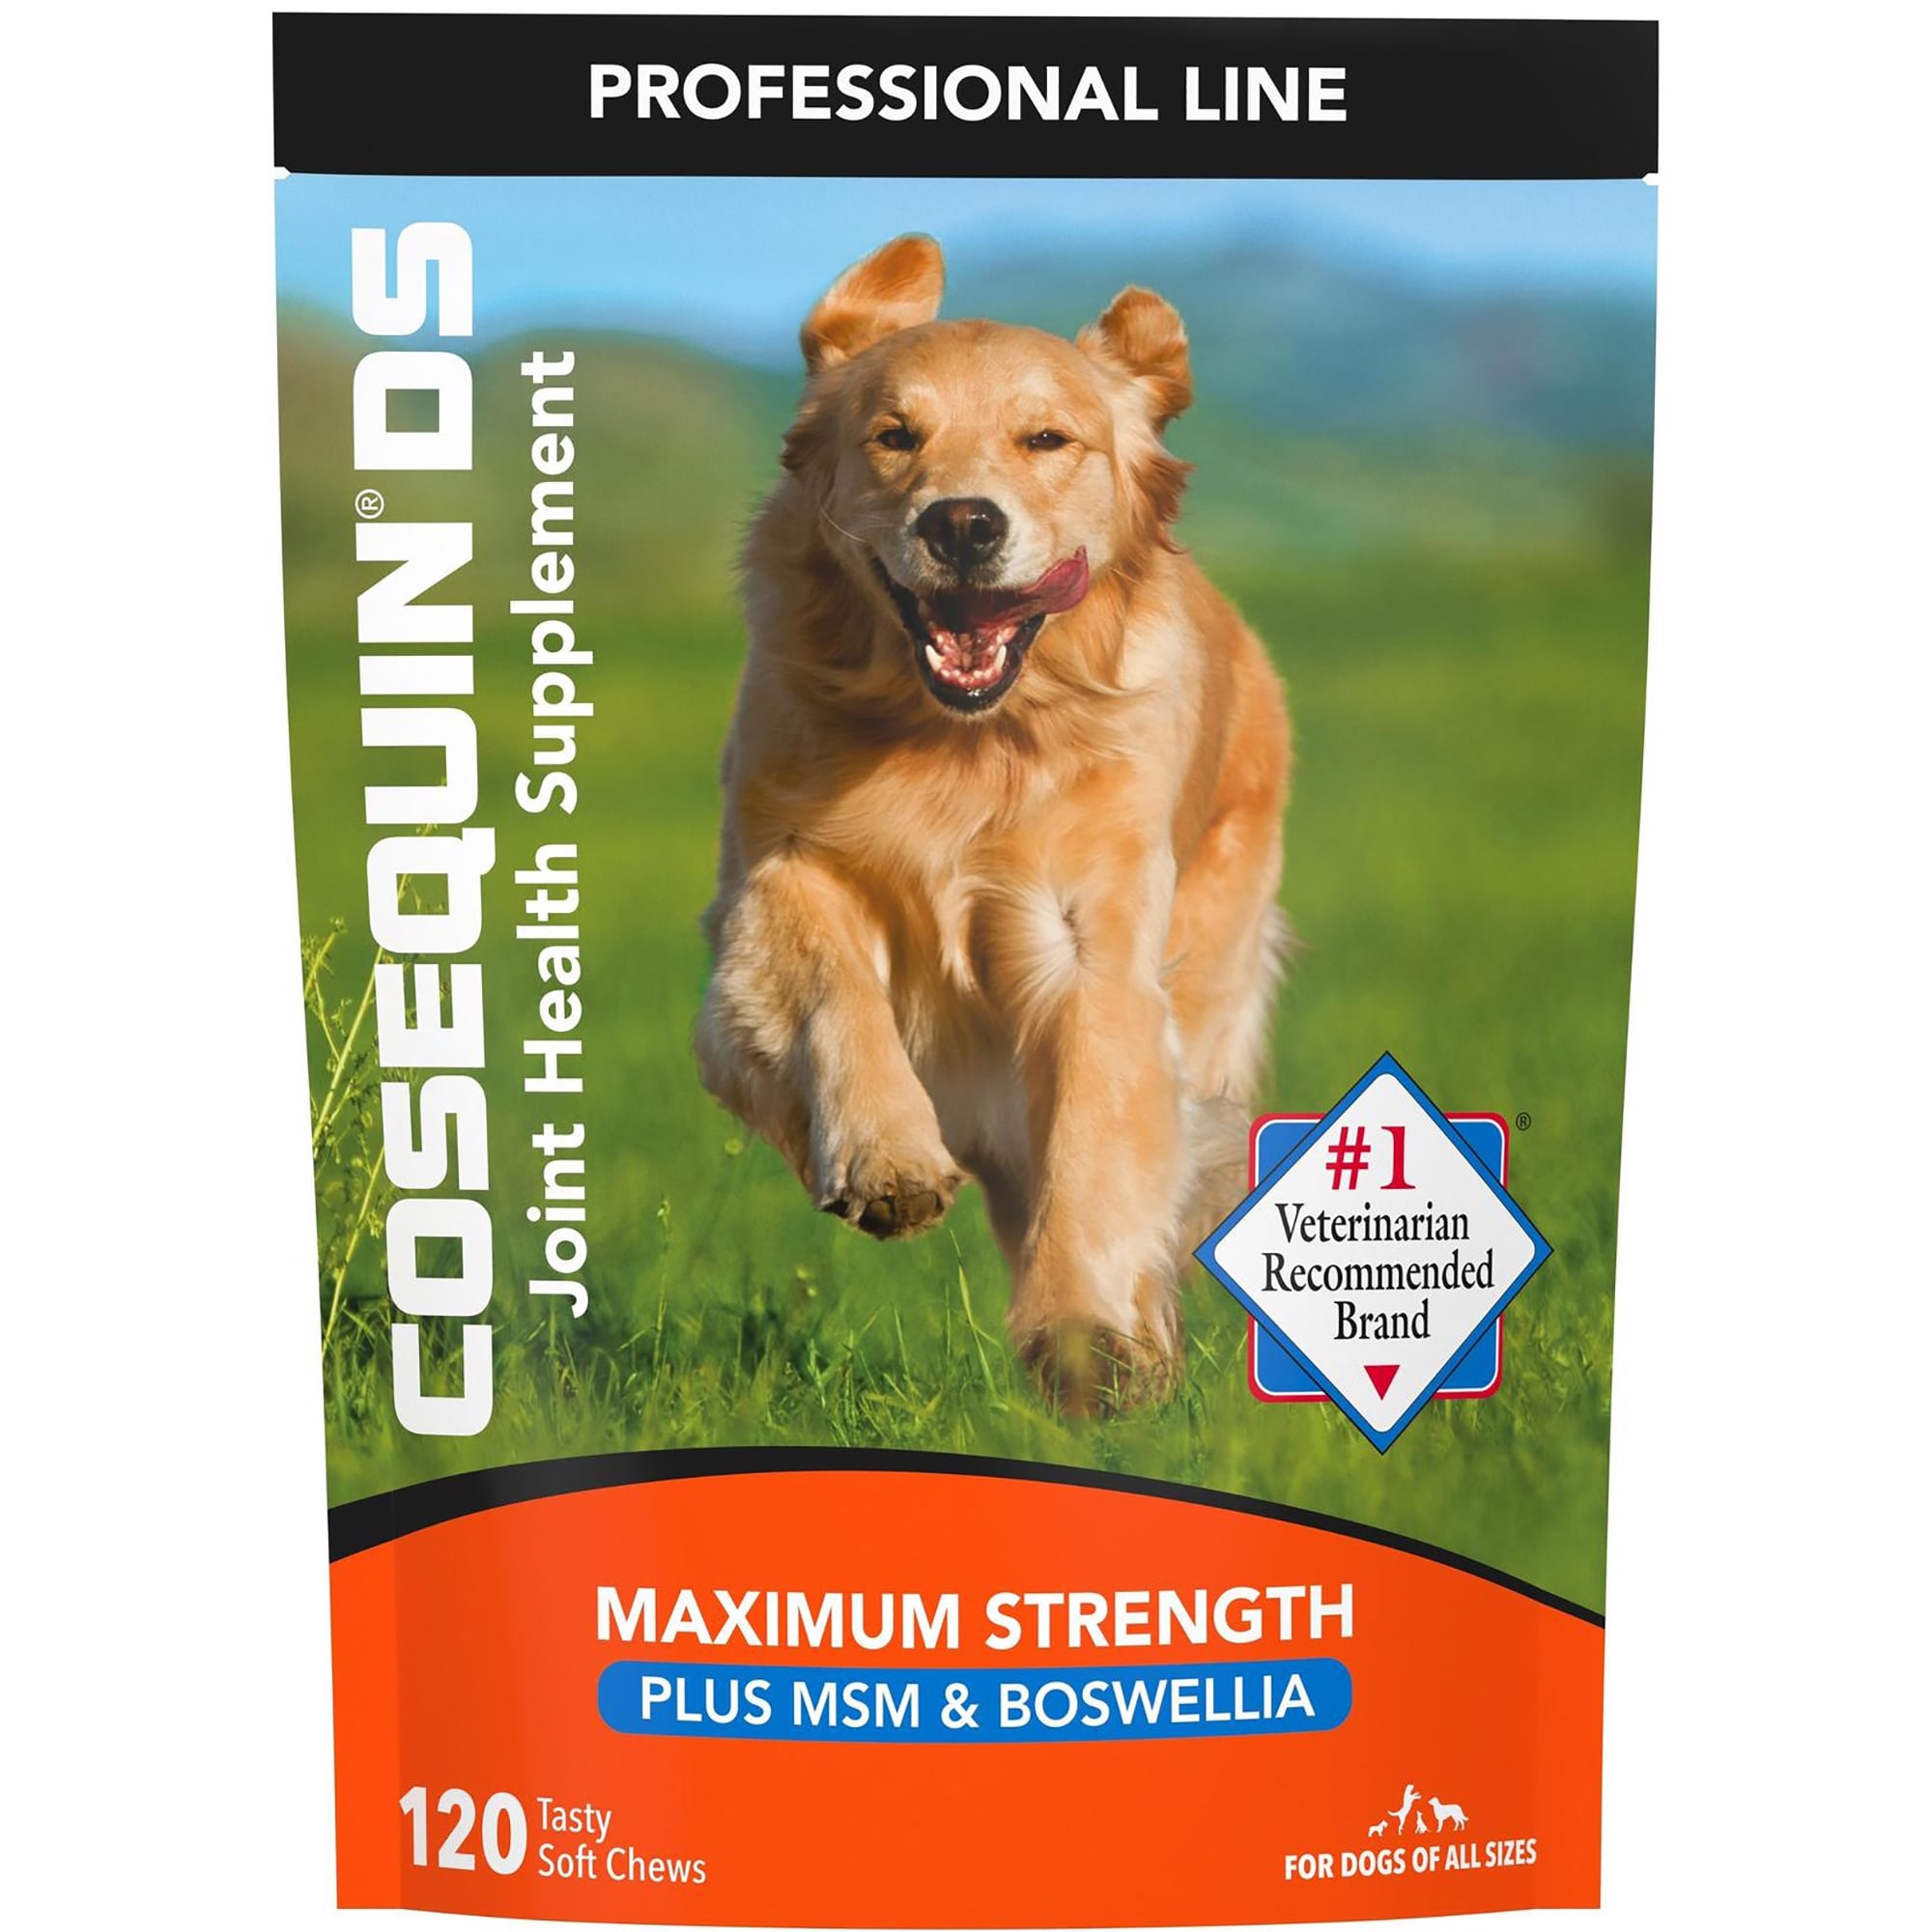 cosequin ds plus msm for dogs